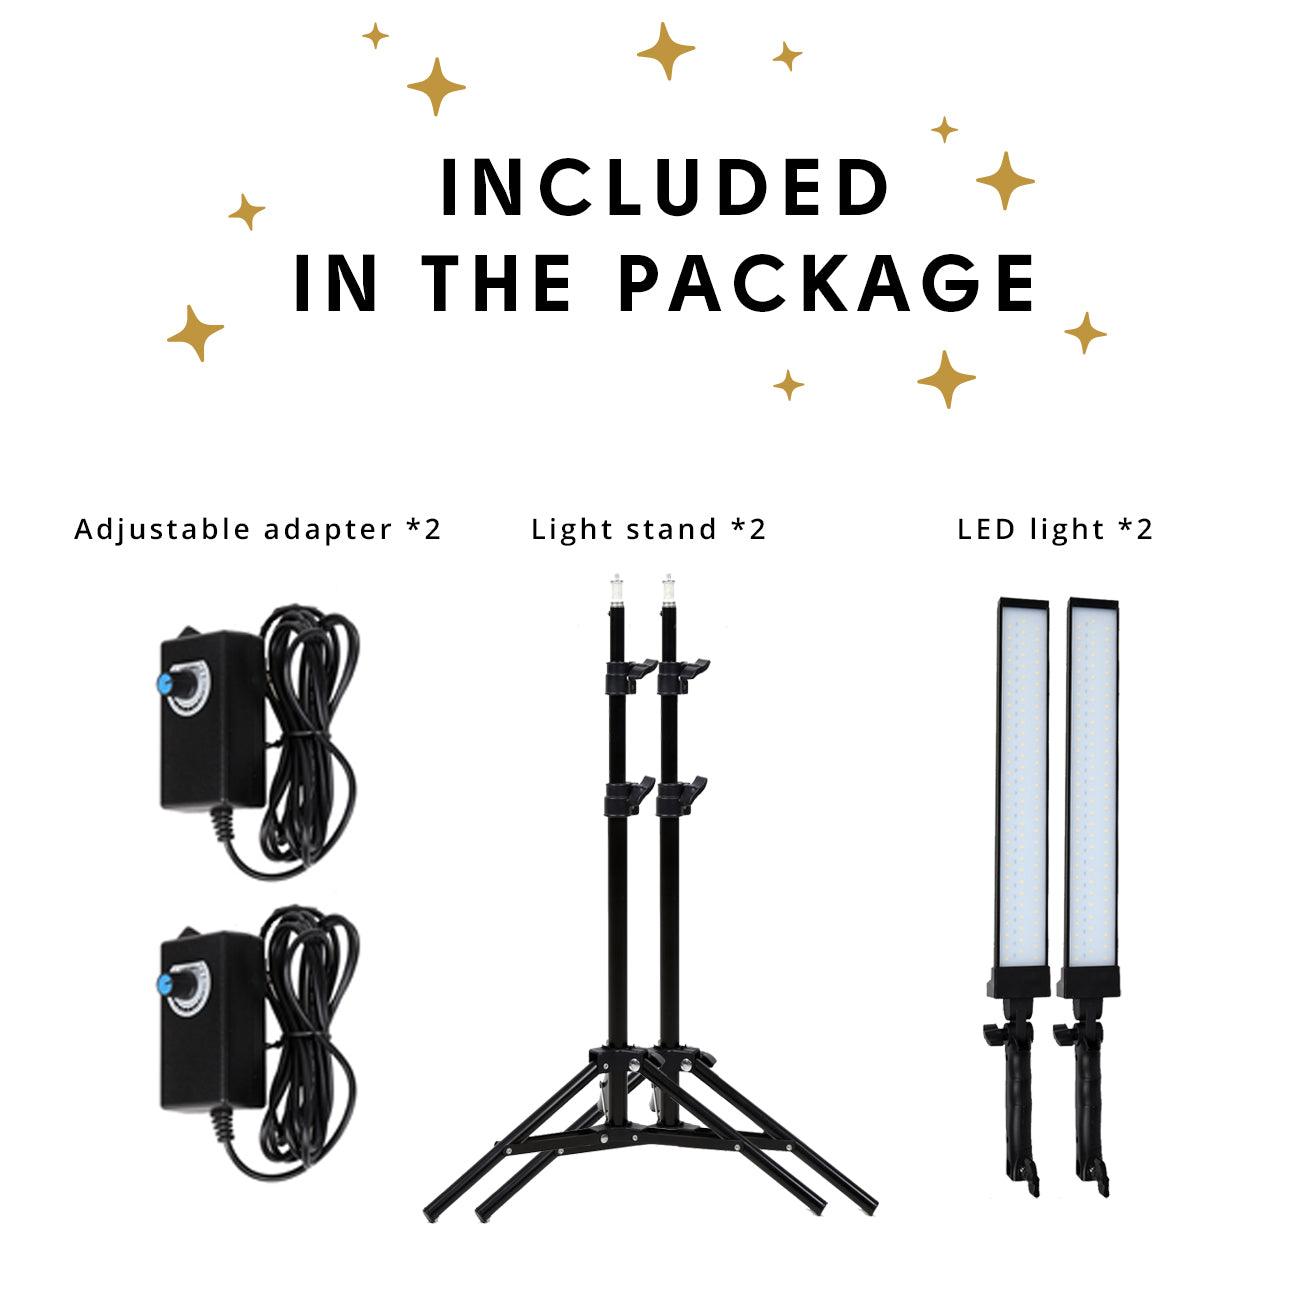 Skinny LED Lighting Kit what's included in package